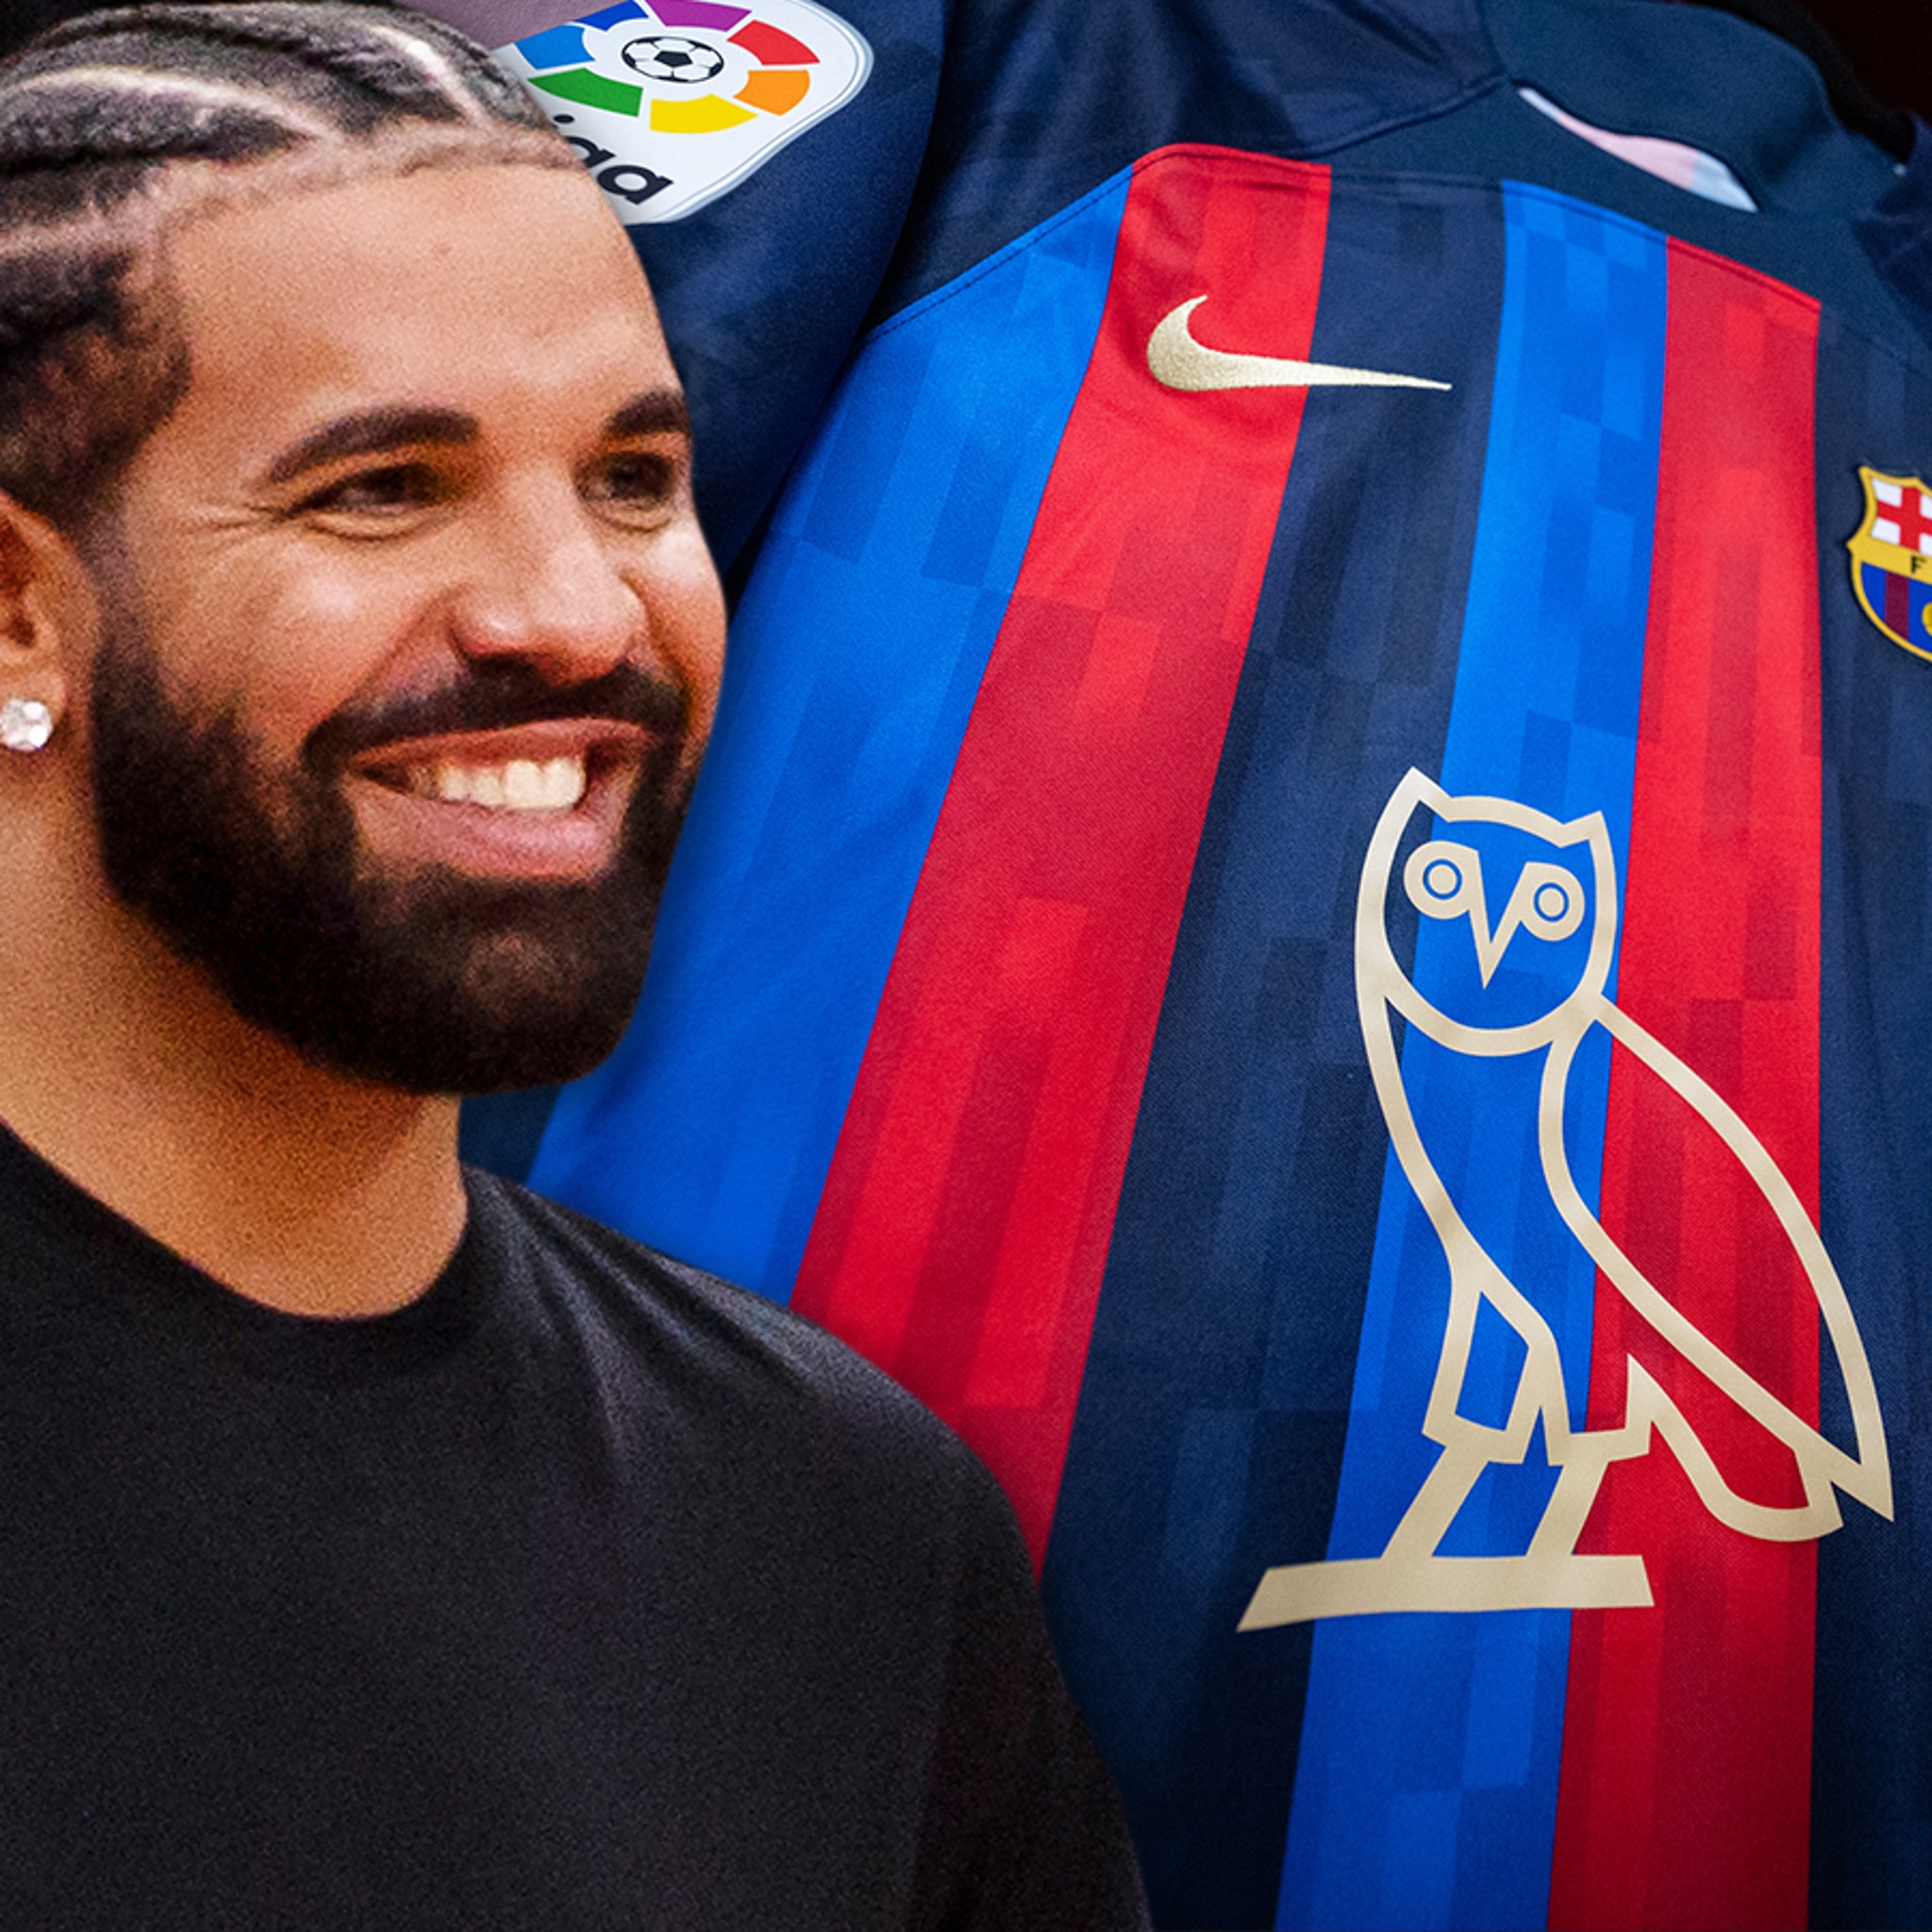 Barcelona to sport Drake's OVO logo on jersey for El Clasico at Madrid